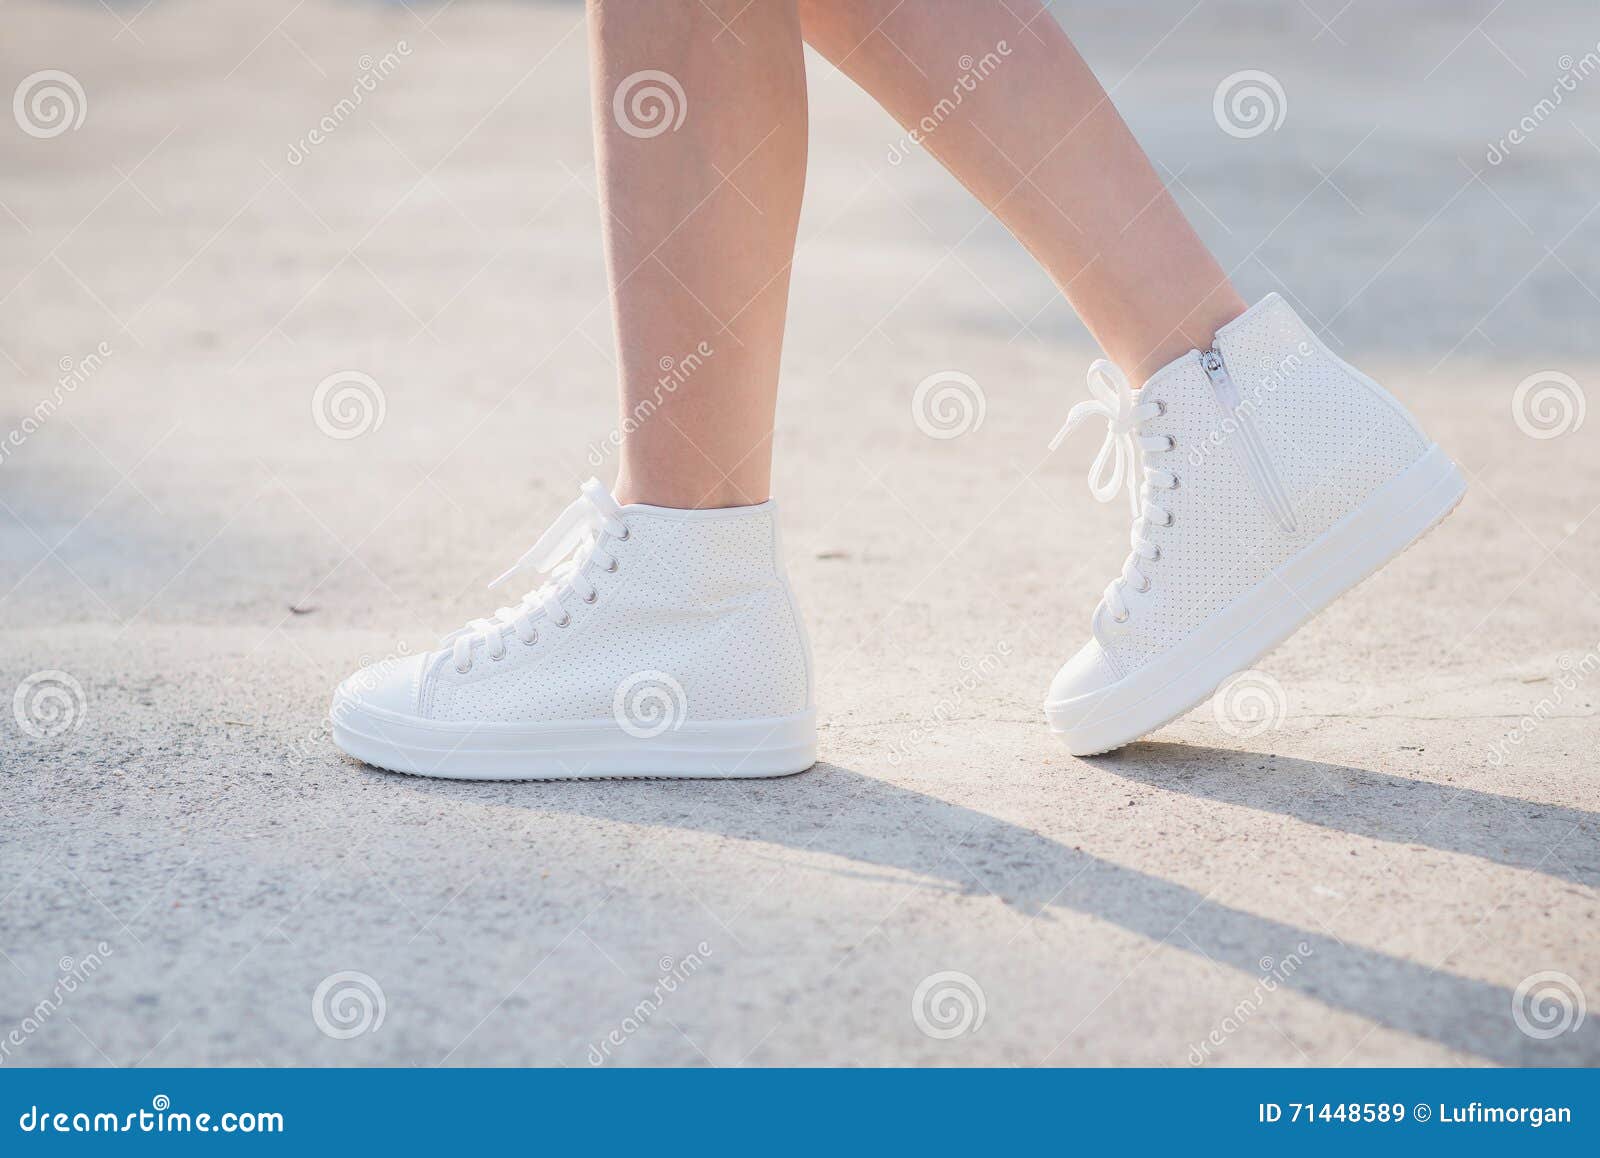 Woman in White Sneakers Walking Under Sunlight Stock Image - Image of ...